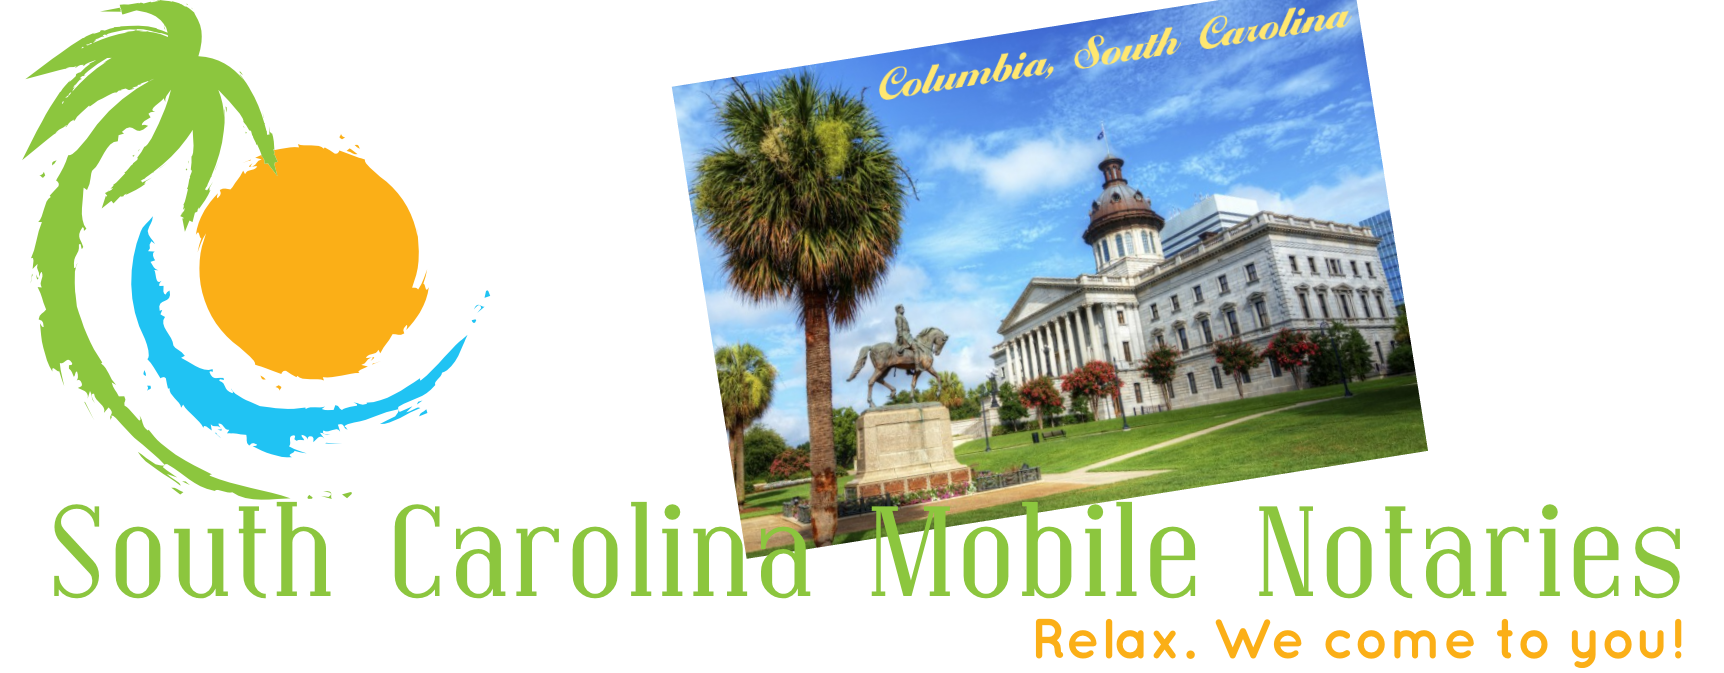 Columbia South Carolna Mobile Notaries; Columbia mobile notary service; traveling notary public Columbia; Columbia wedding officiants; signing agents Columbia, SC